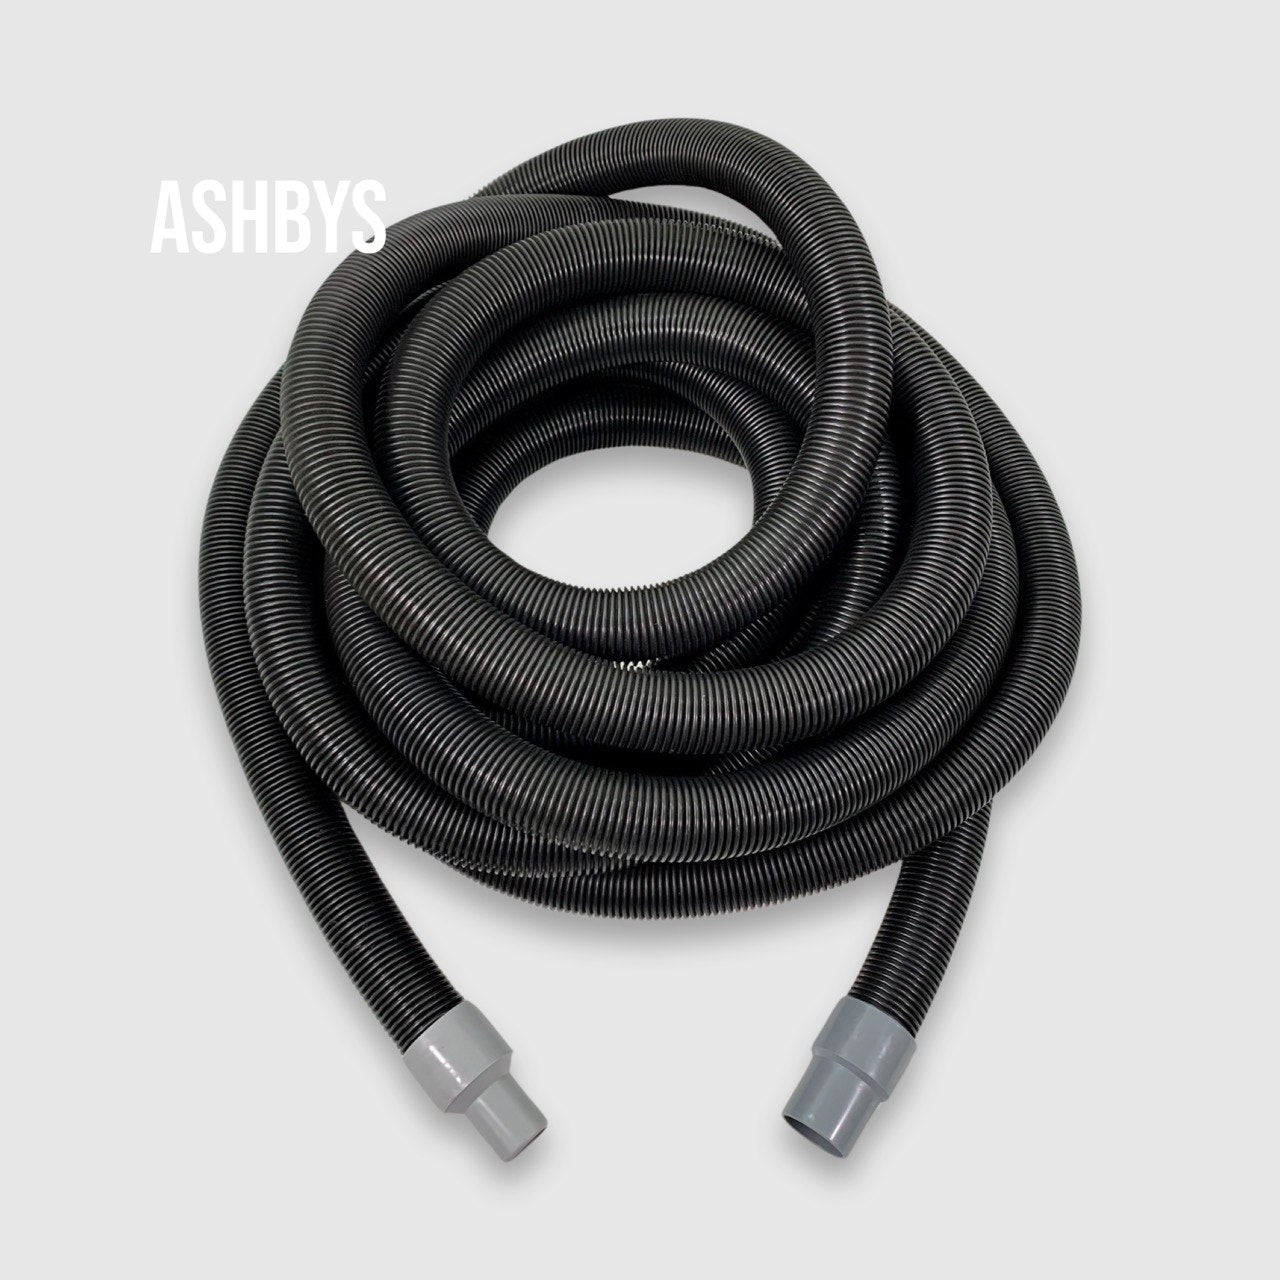 45ft BLACK 2 inch Vacuum Hose ONLY - for Carpet Cleaning